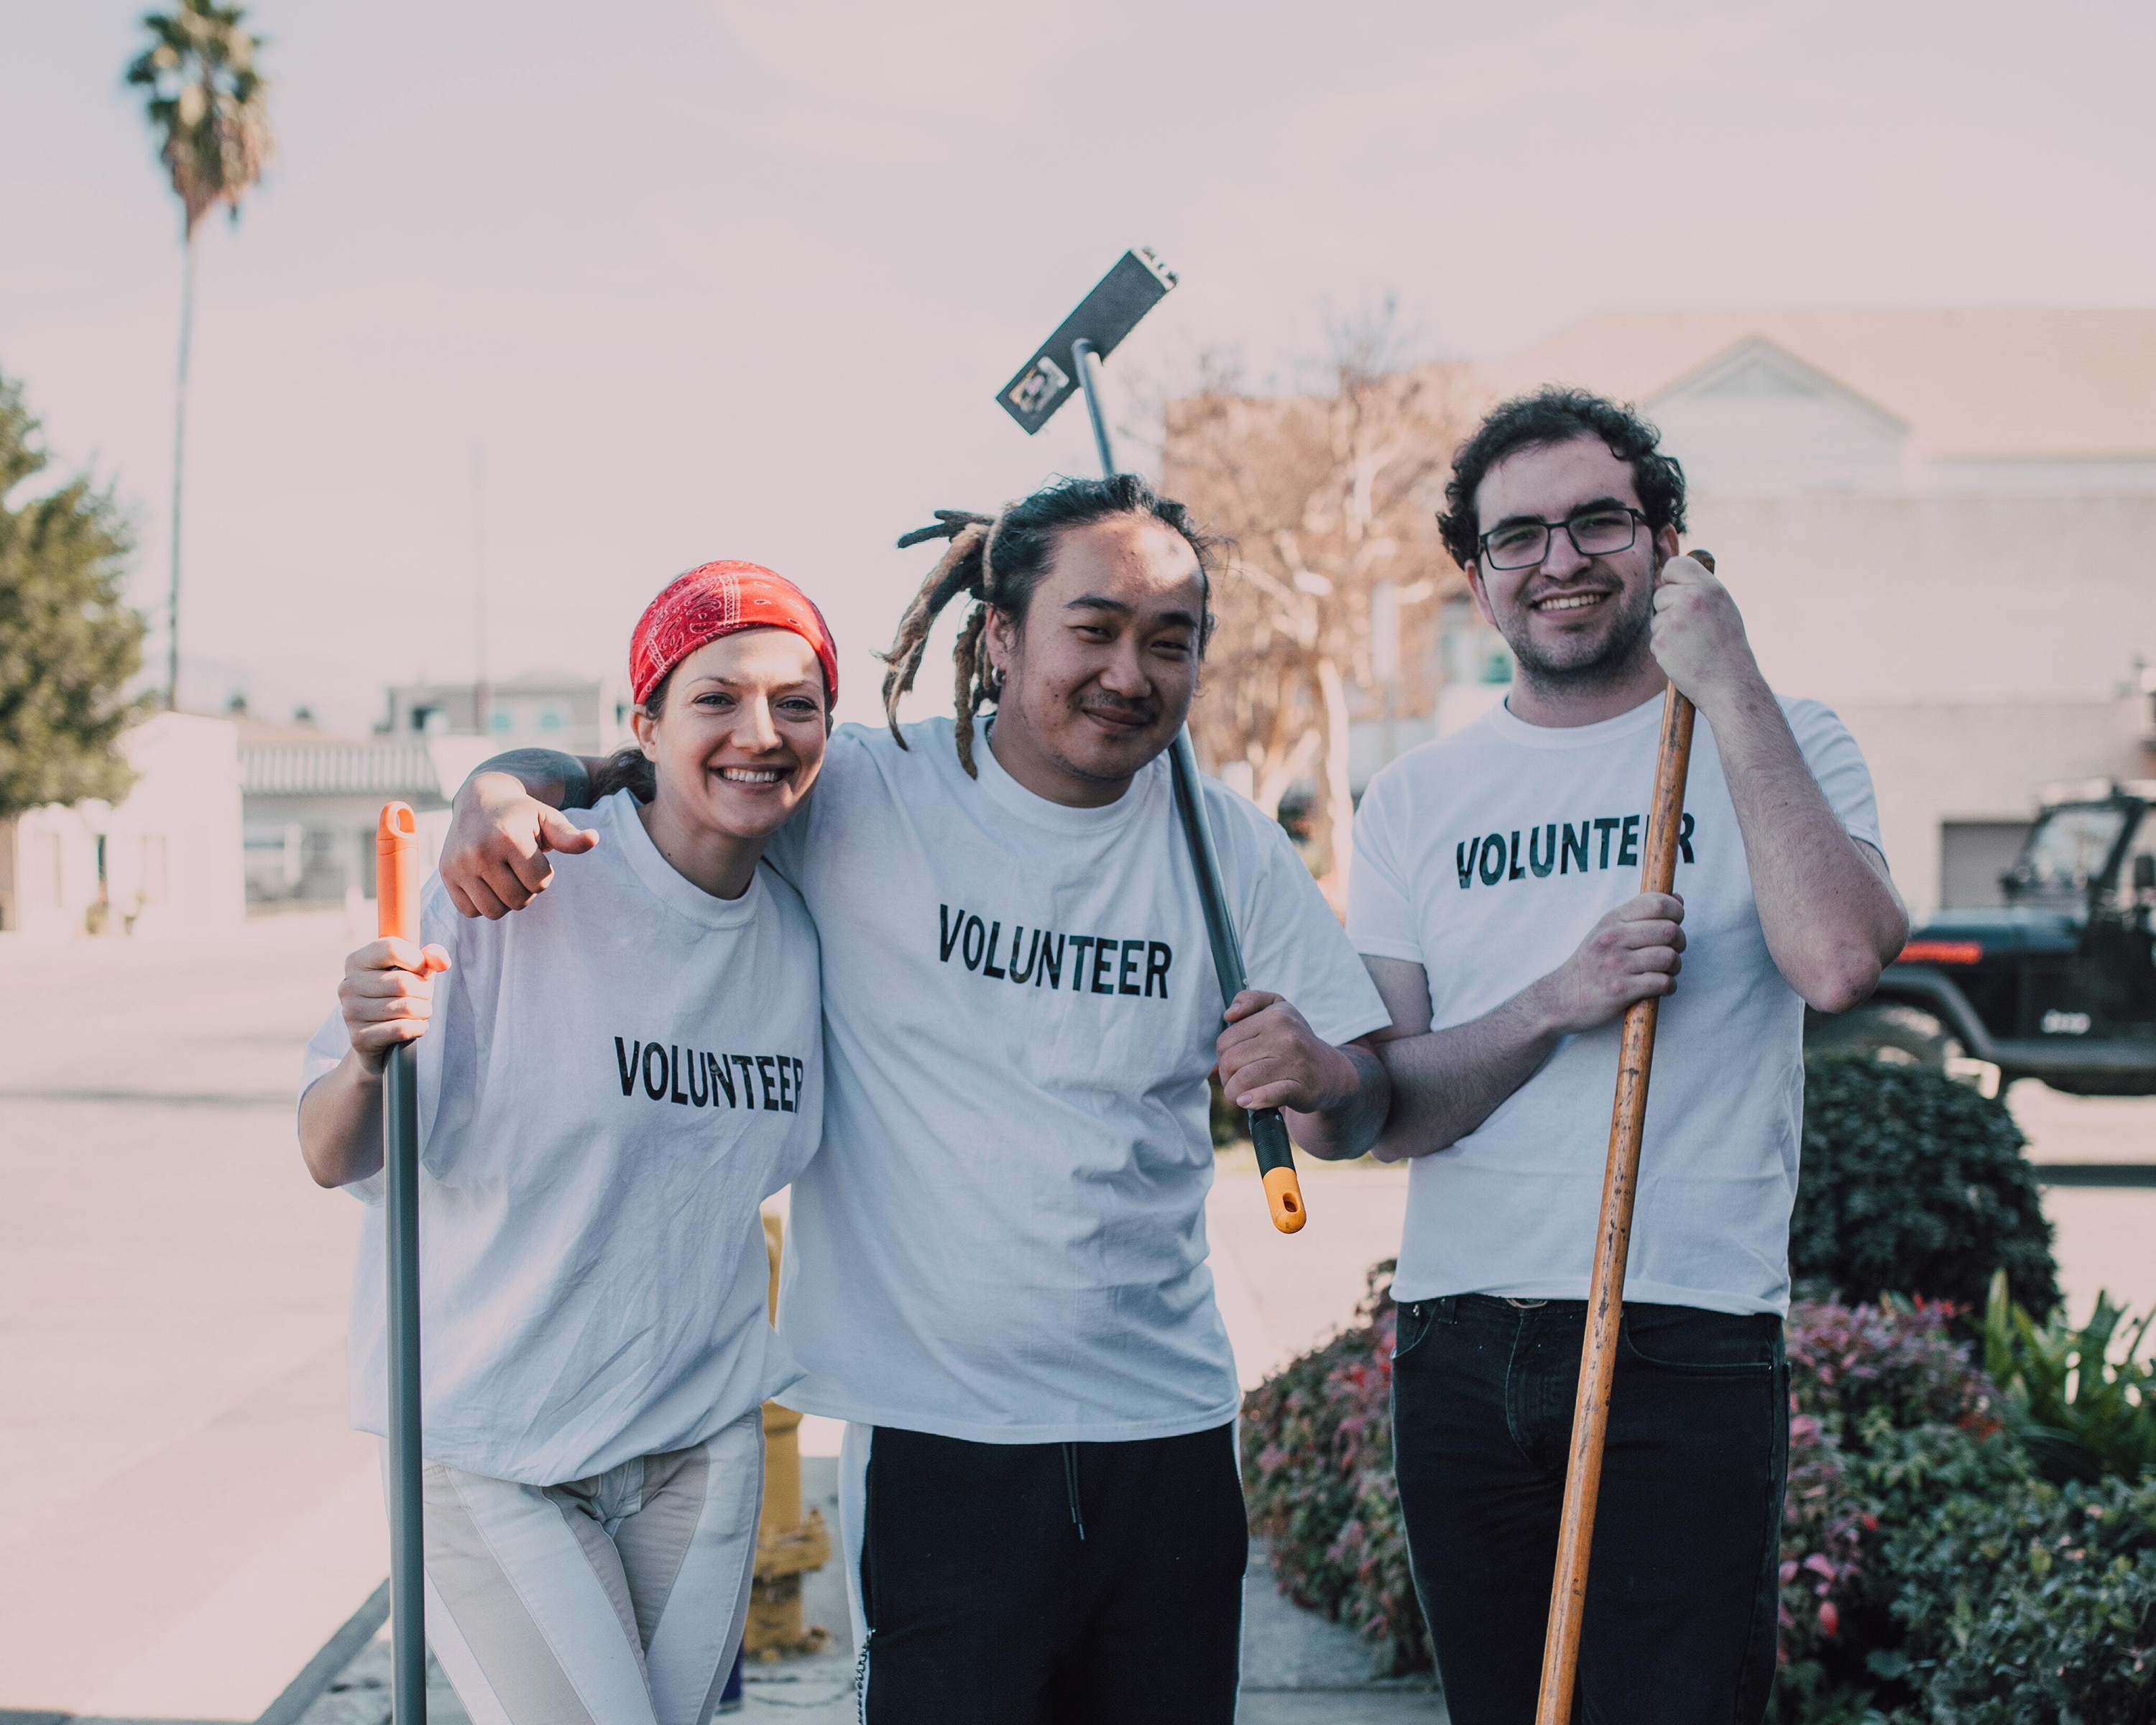 7 Top Tips for Recruiting and Organizing Event Volunteers